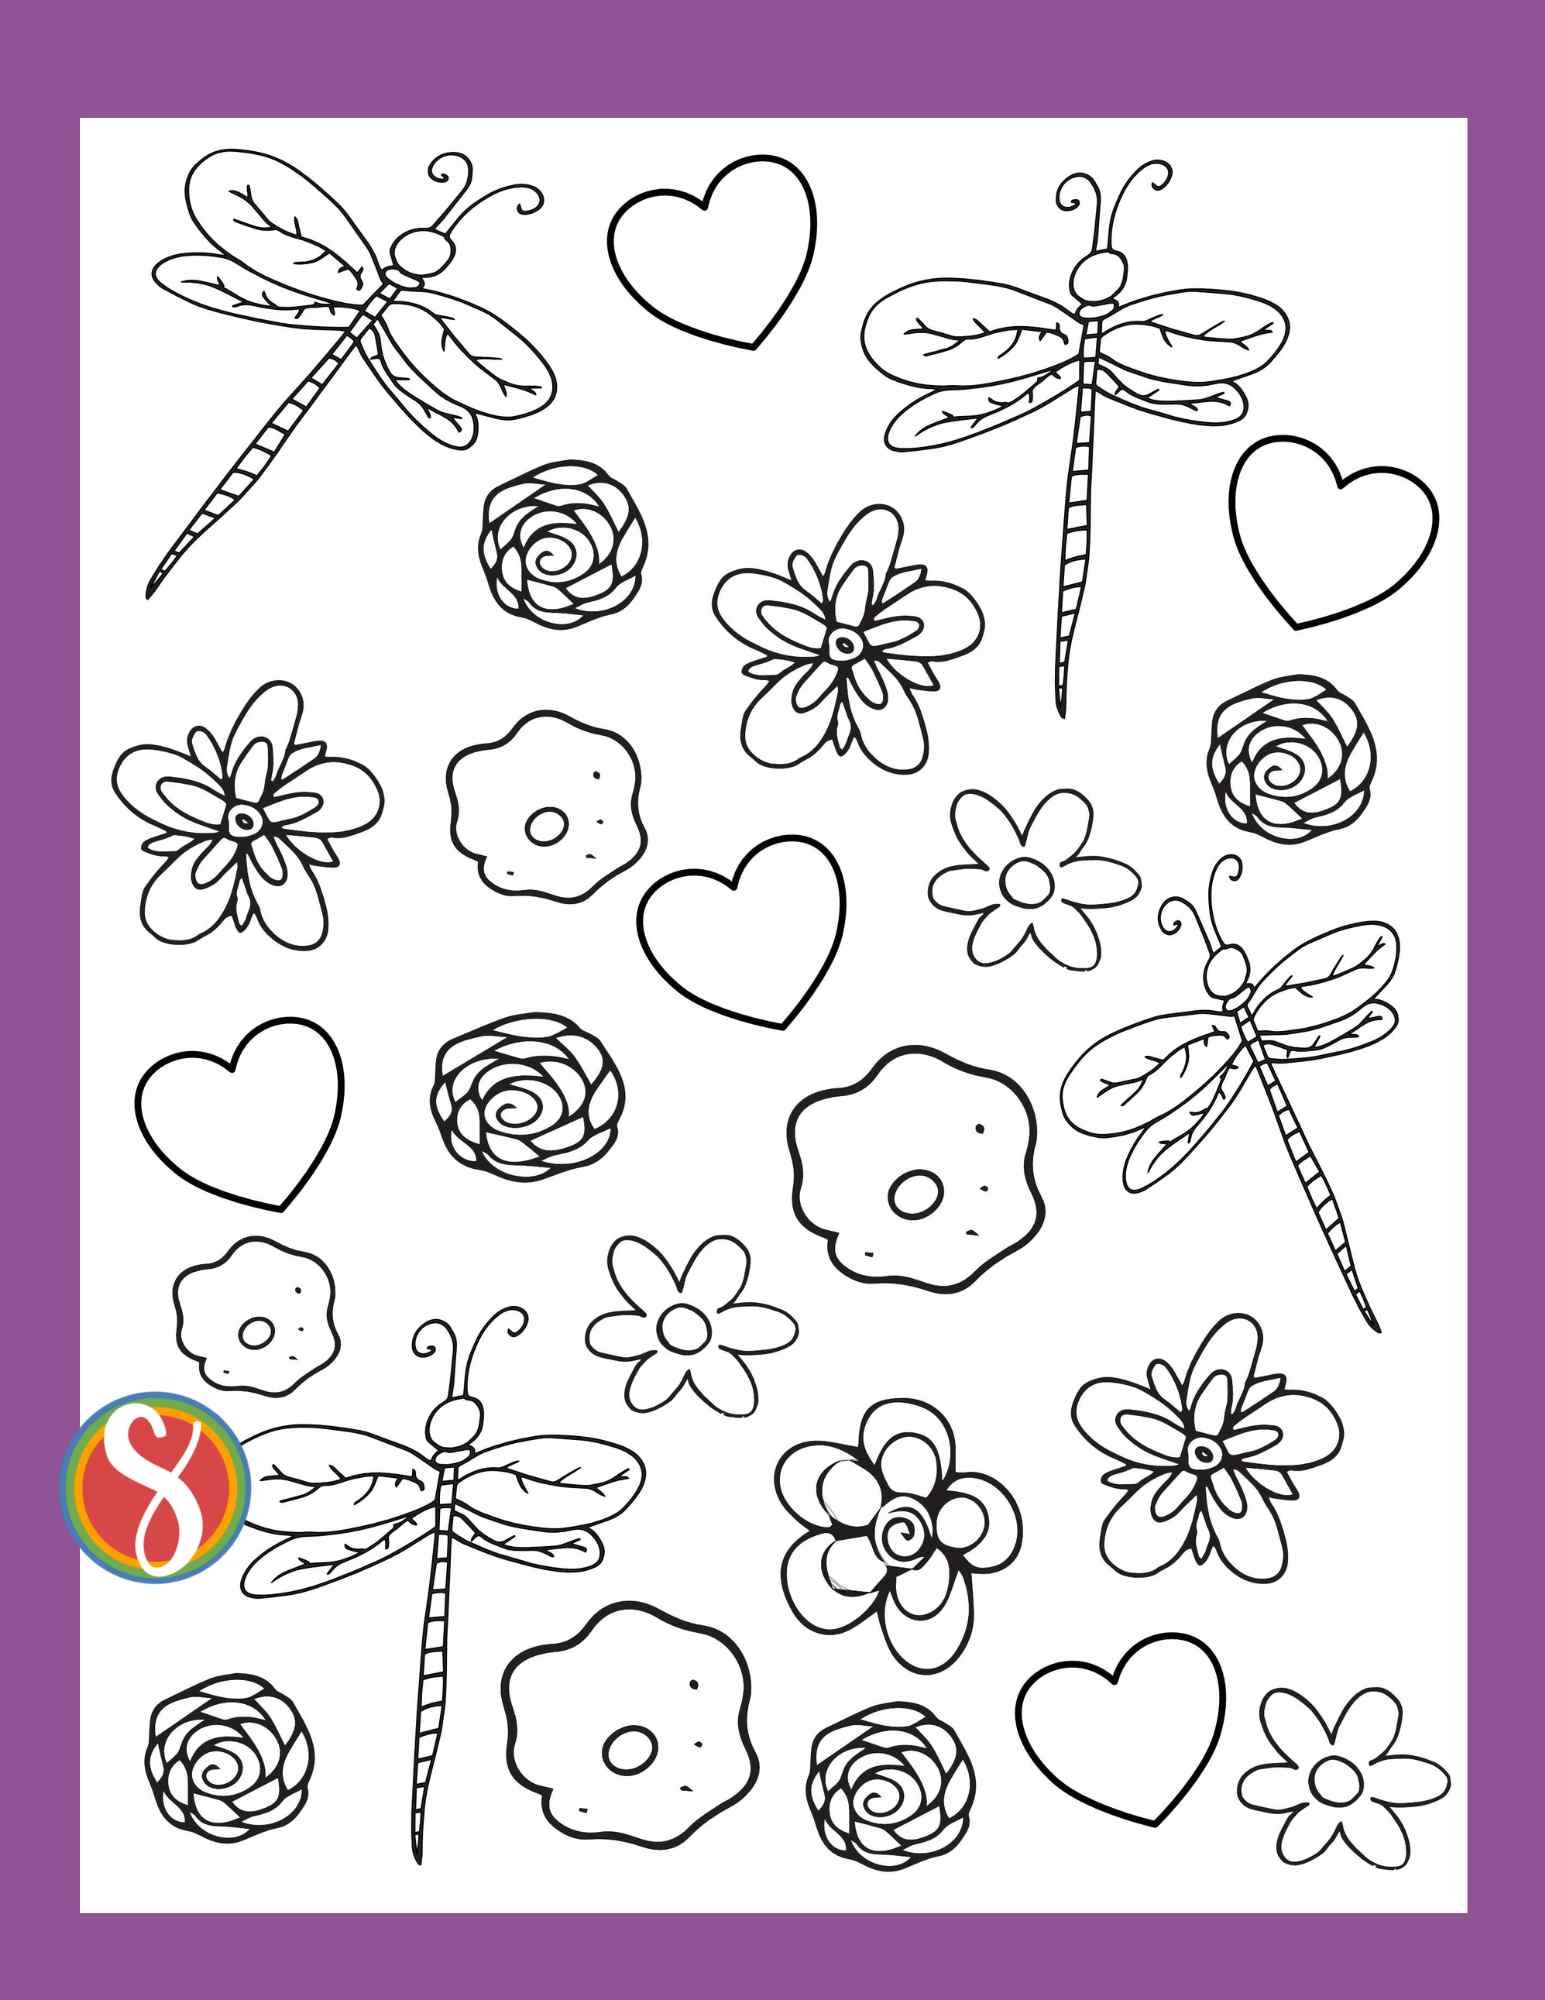 4 little dragonflies and a bunch of little flowers coloring page